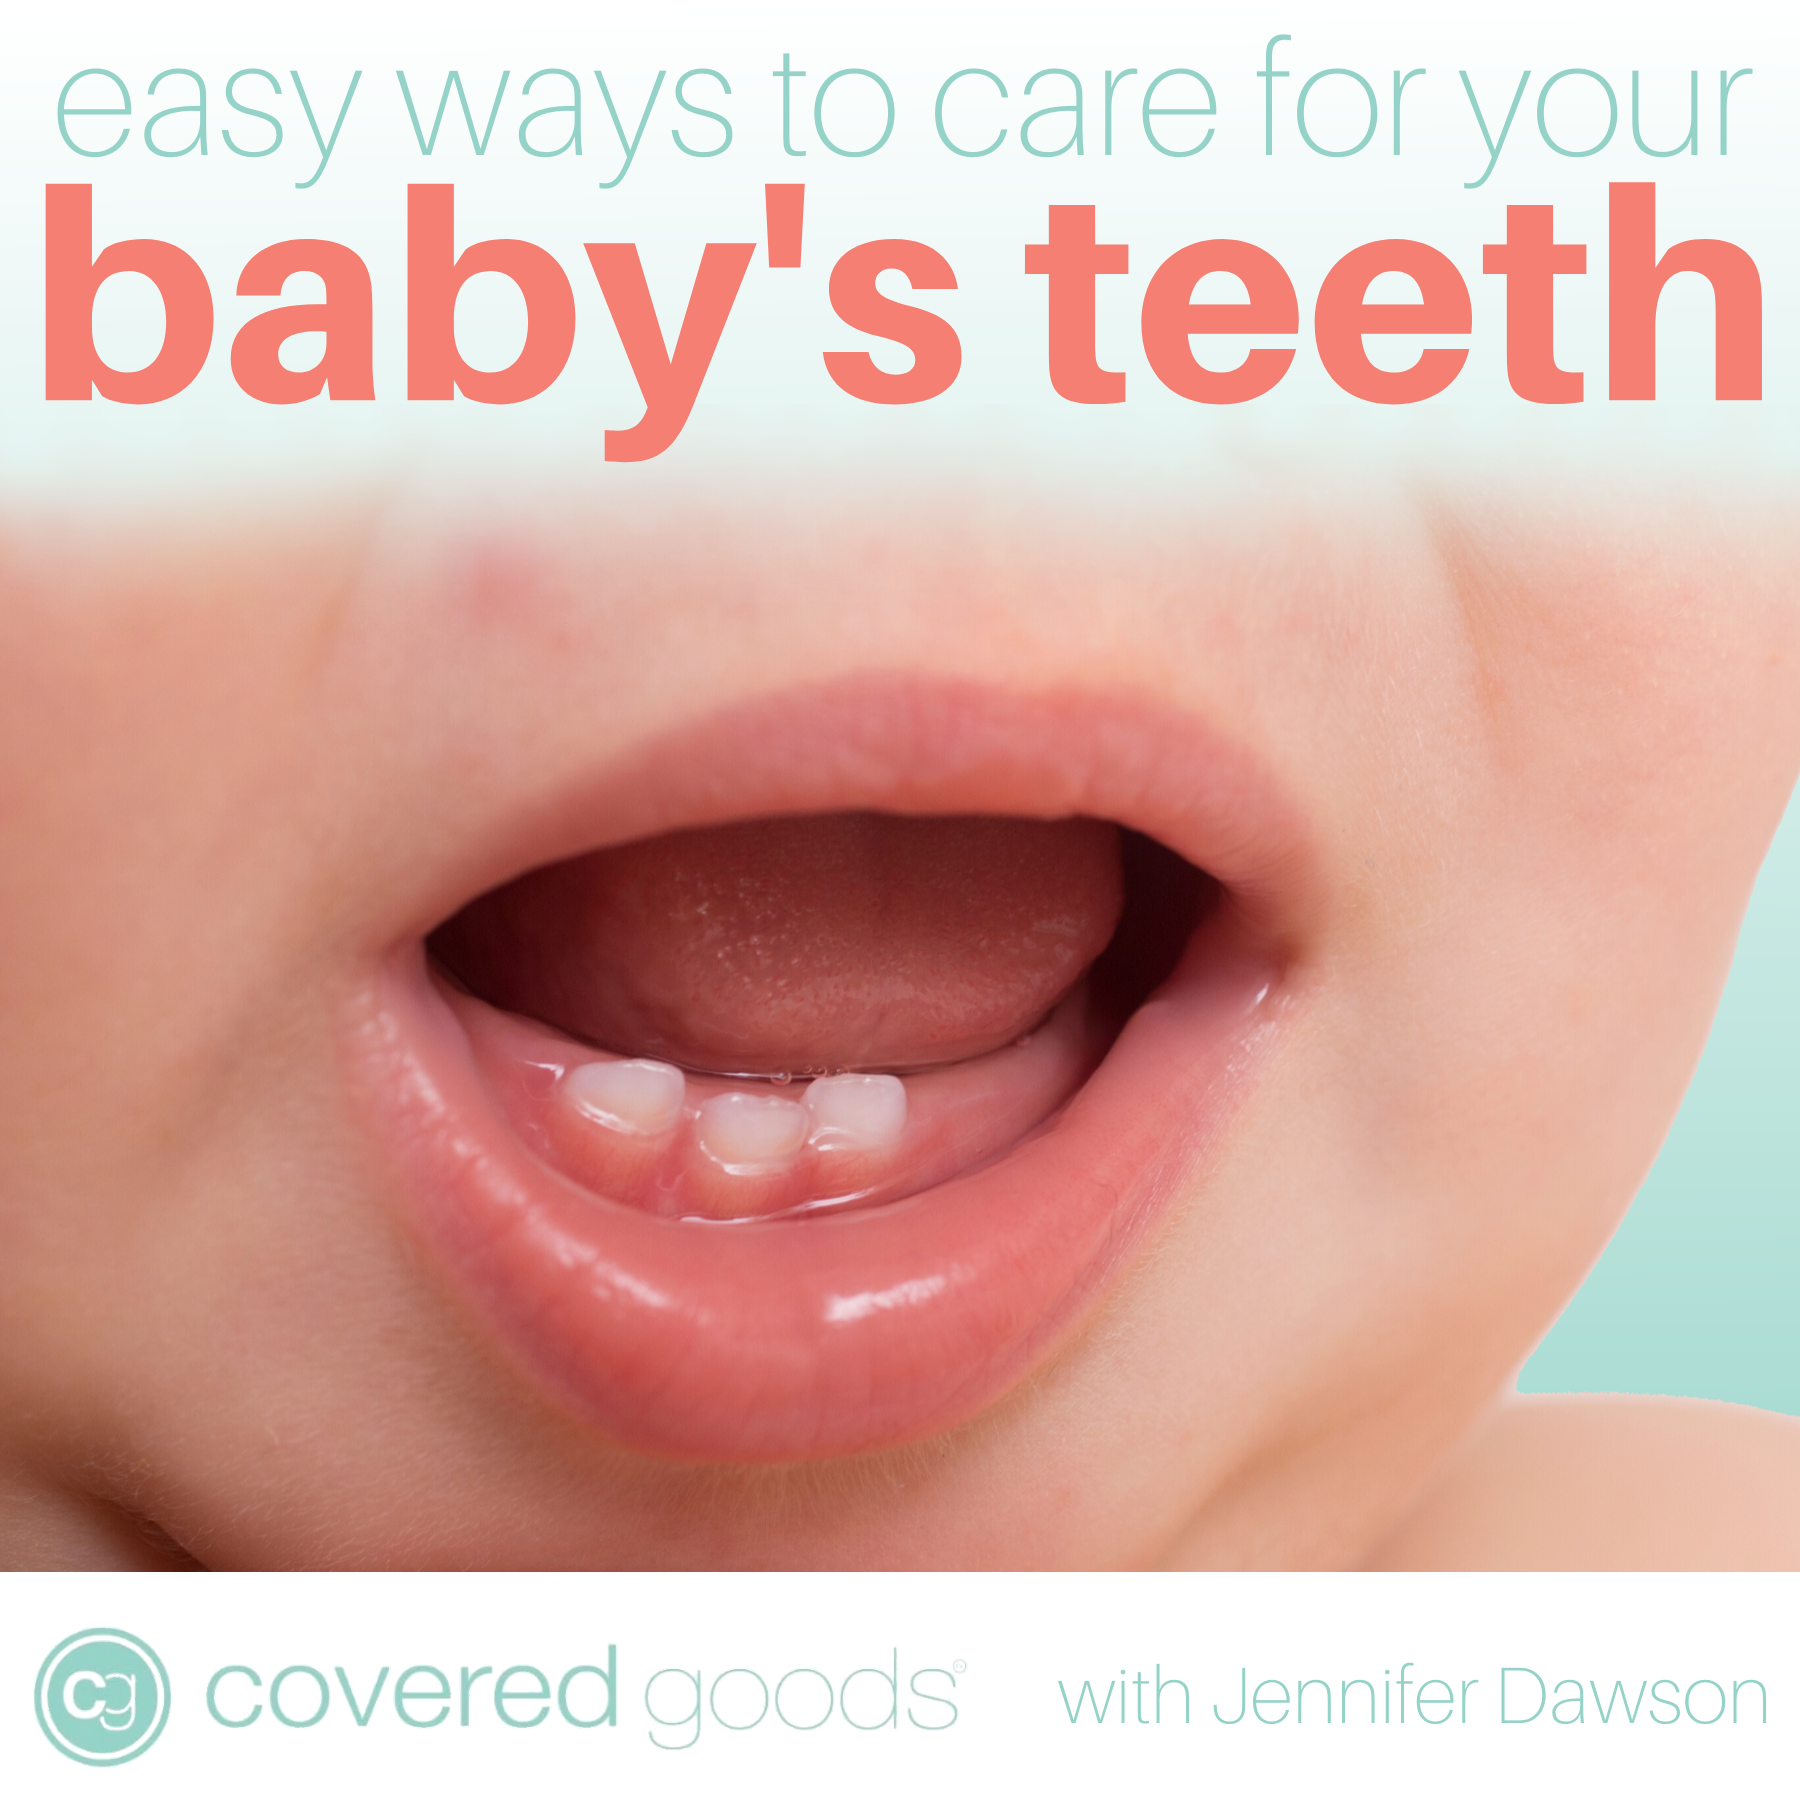 Easy Ways To Care For Your Baby's Teeth